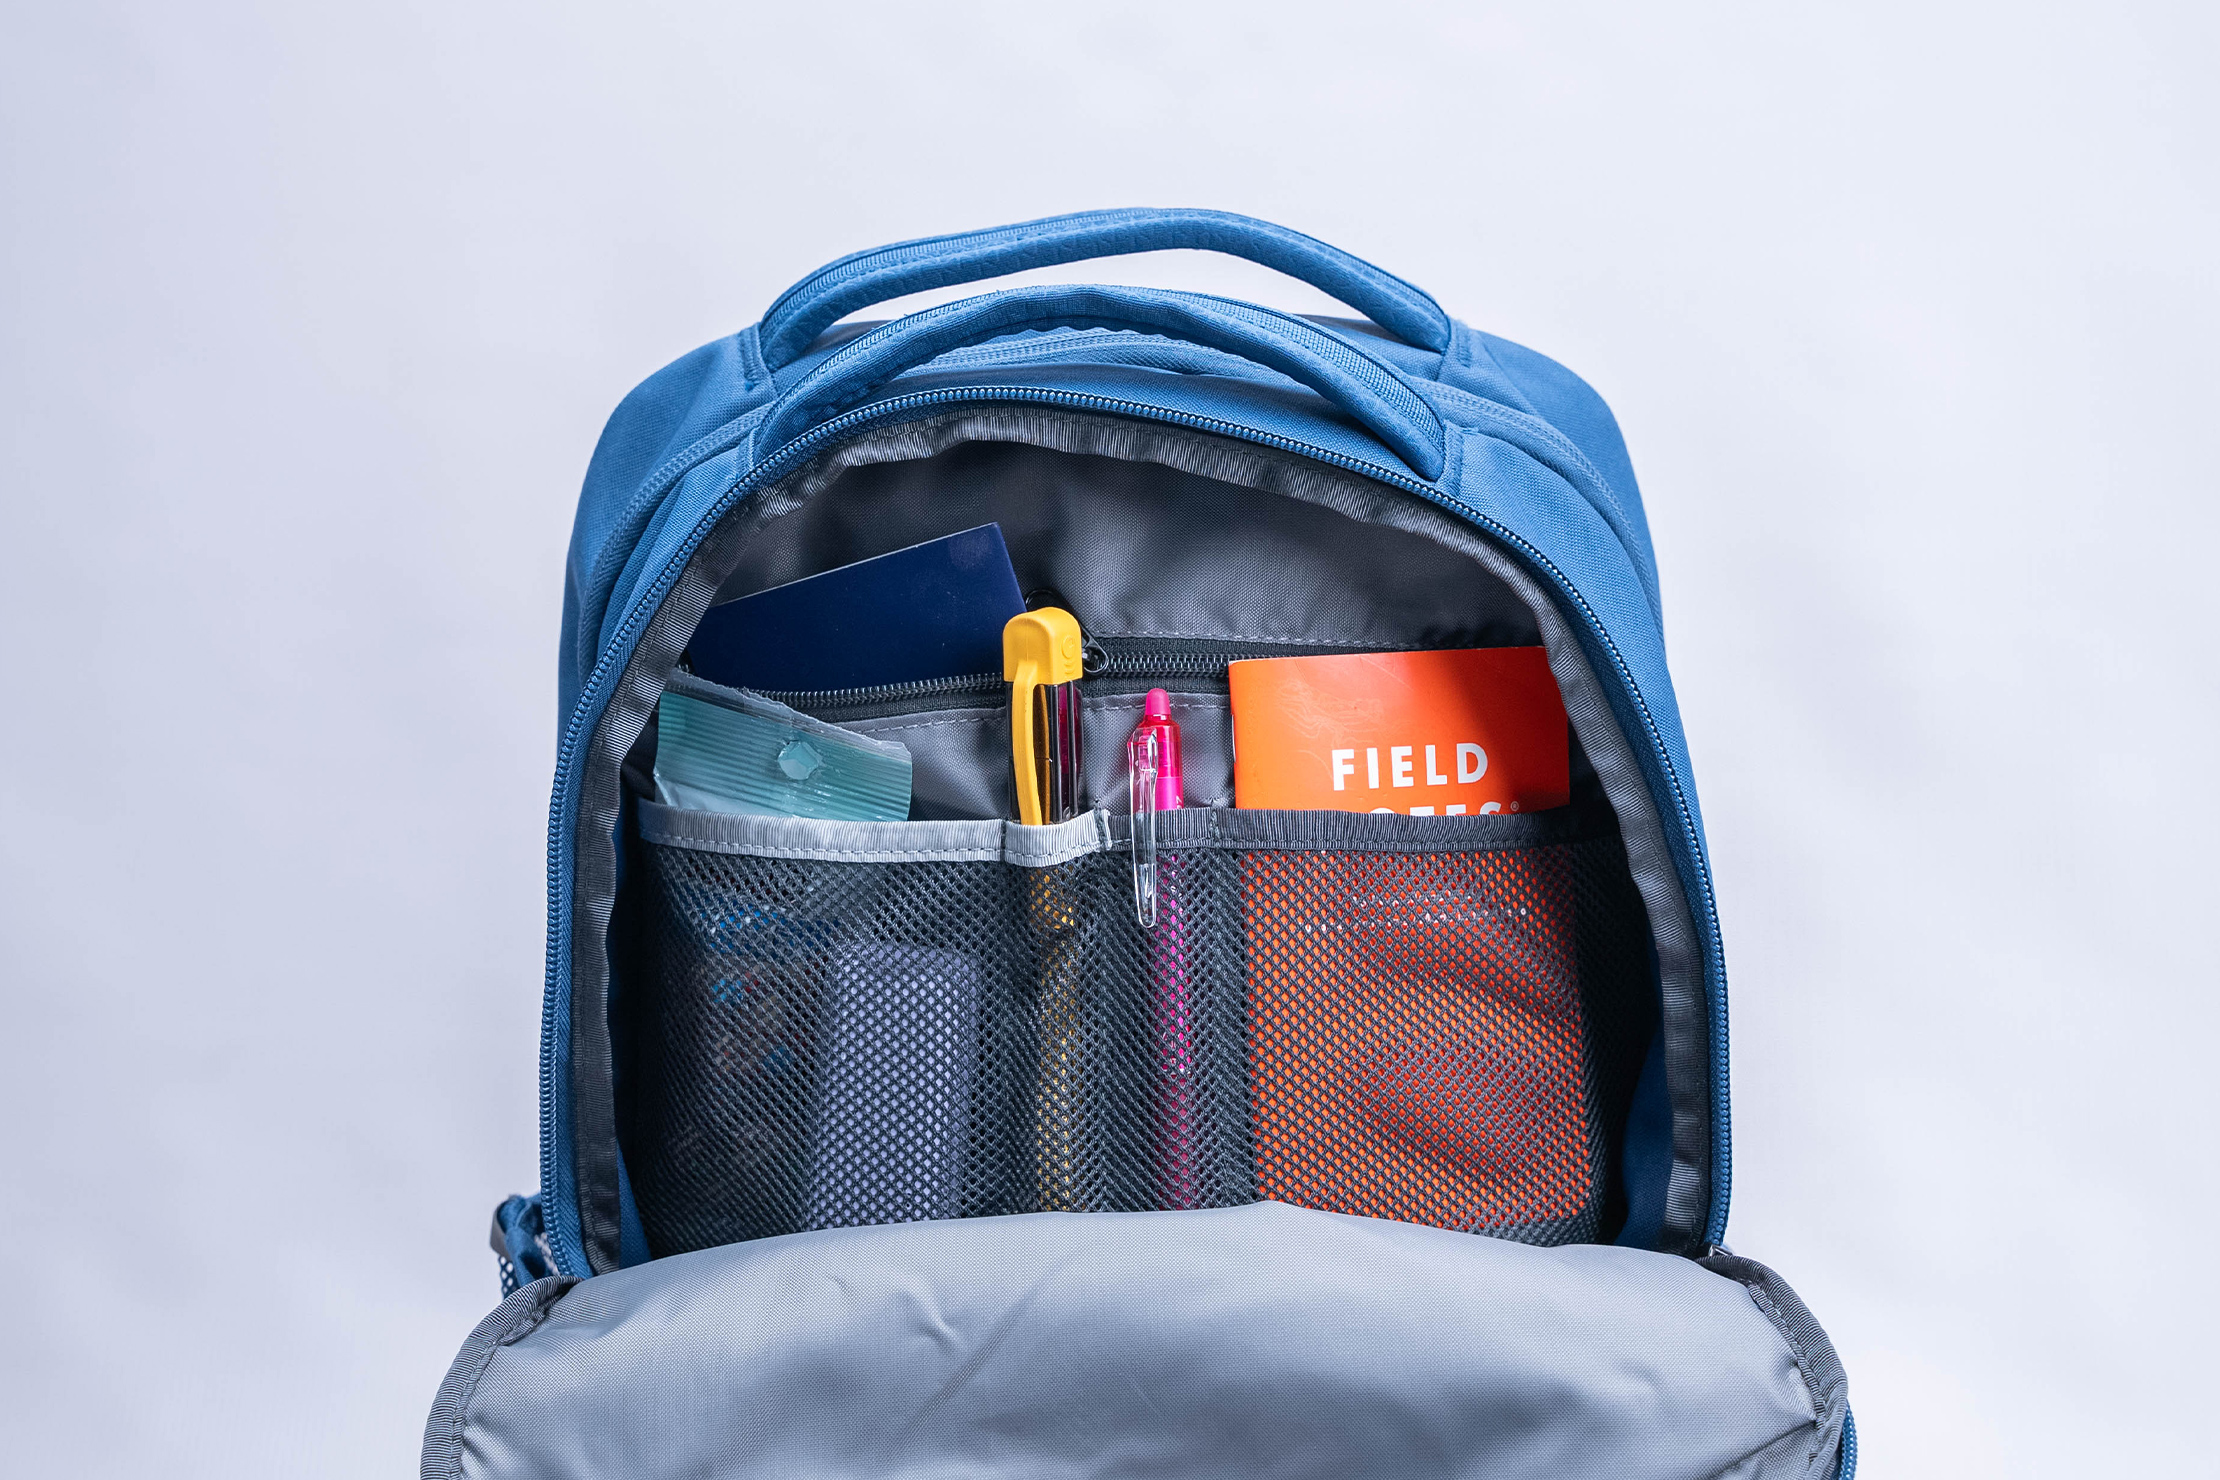 The North Face Vault Backpack Organization